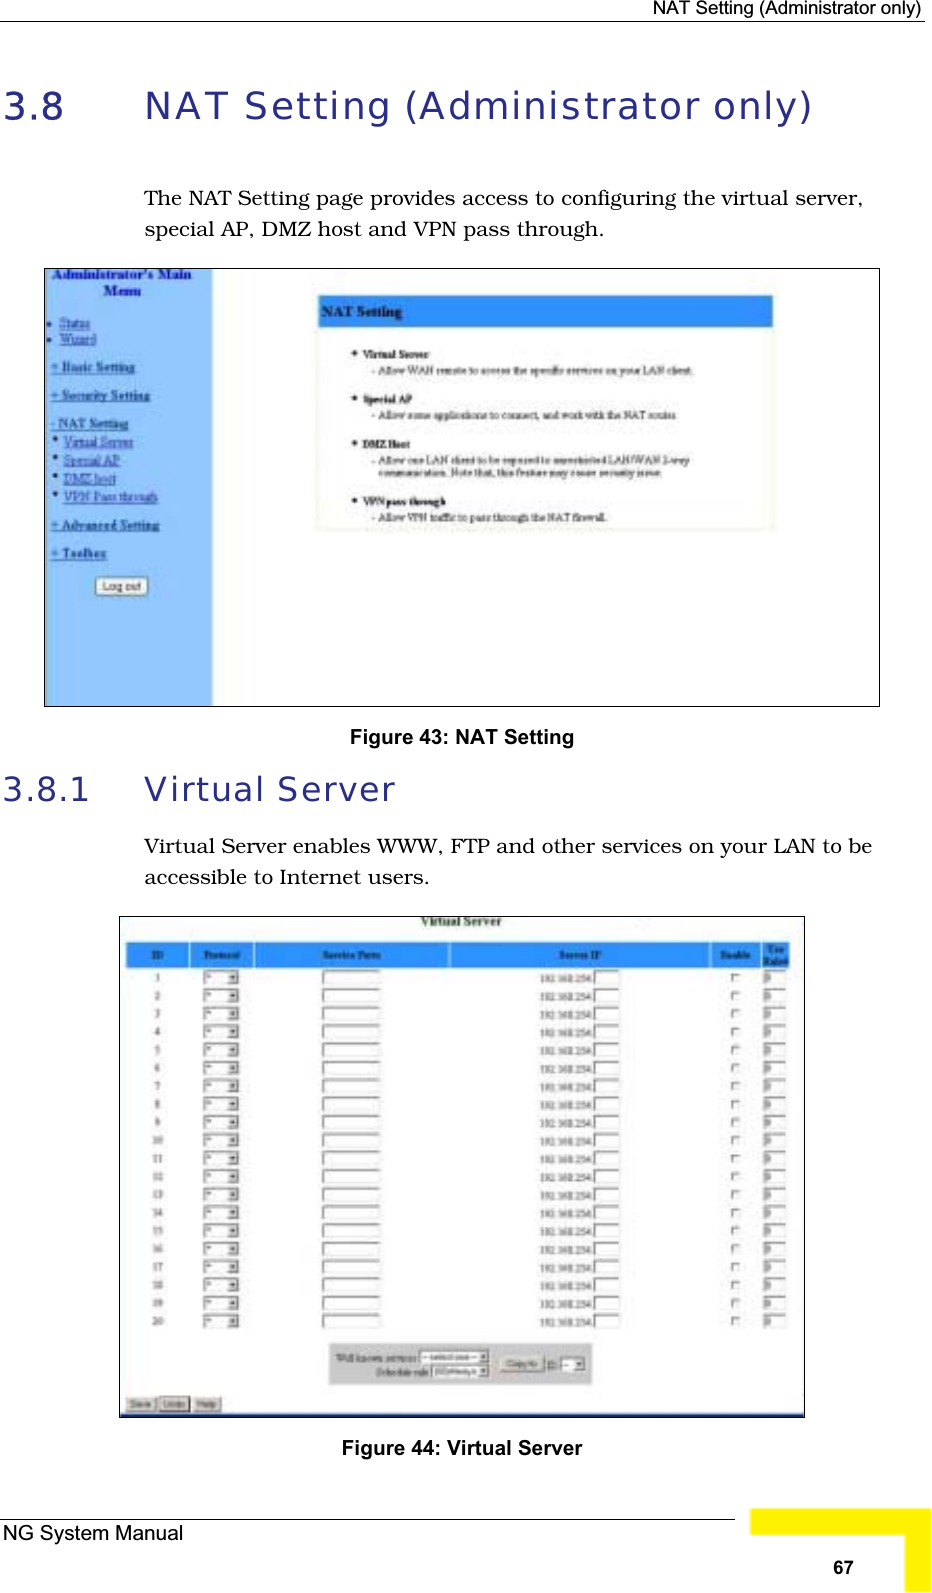 NAT Setting (Administrator only)3.8 NAT Setting (Administrator only) The NAT Setting page provides access to configuring the virtual server,special AP, DMZ host and VPN pass through. Figure 43: NAT Setting 3.8.1 Virtual ServerVirtual Server enables WWW, FTP and other services on your LAN to beaccessible to Internet users.Figure 44: Virtual ServerNG System Manual67